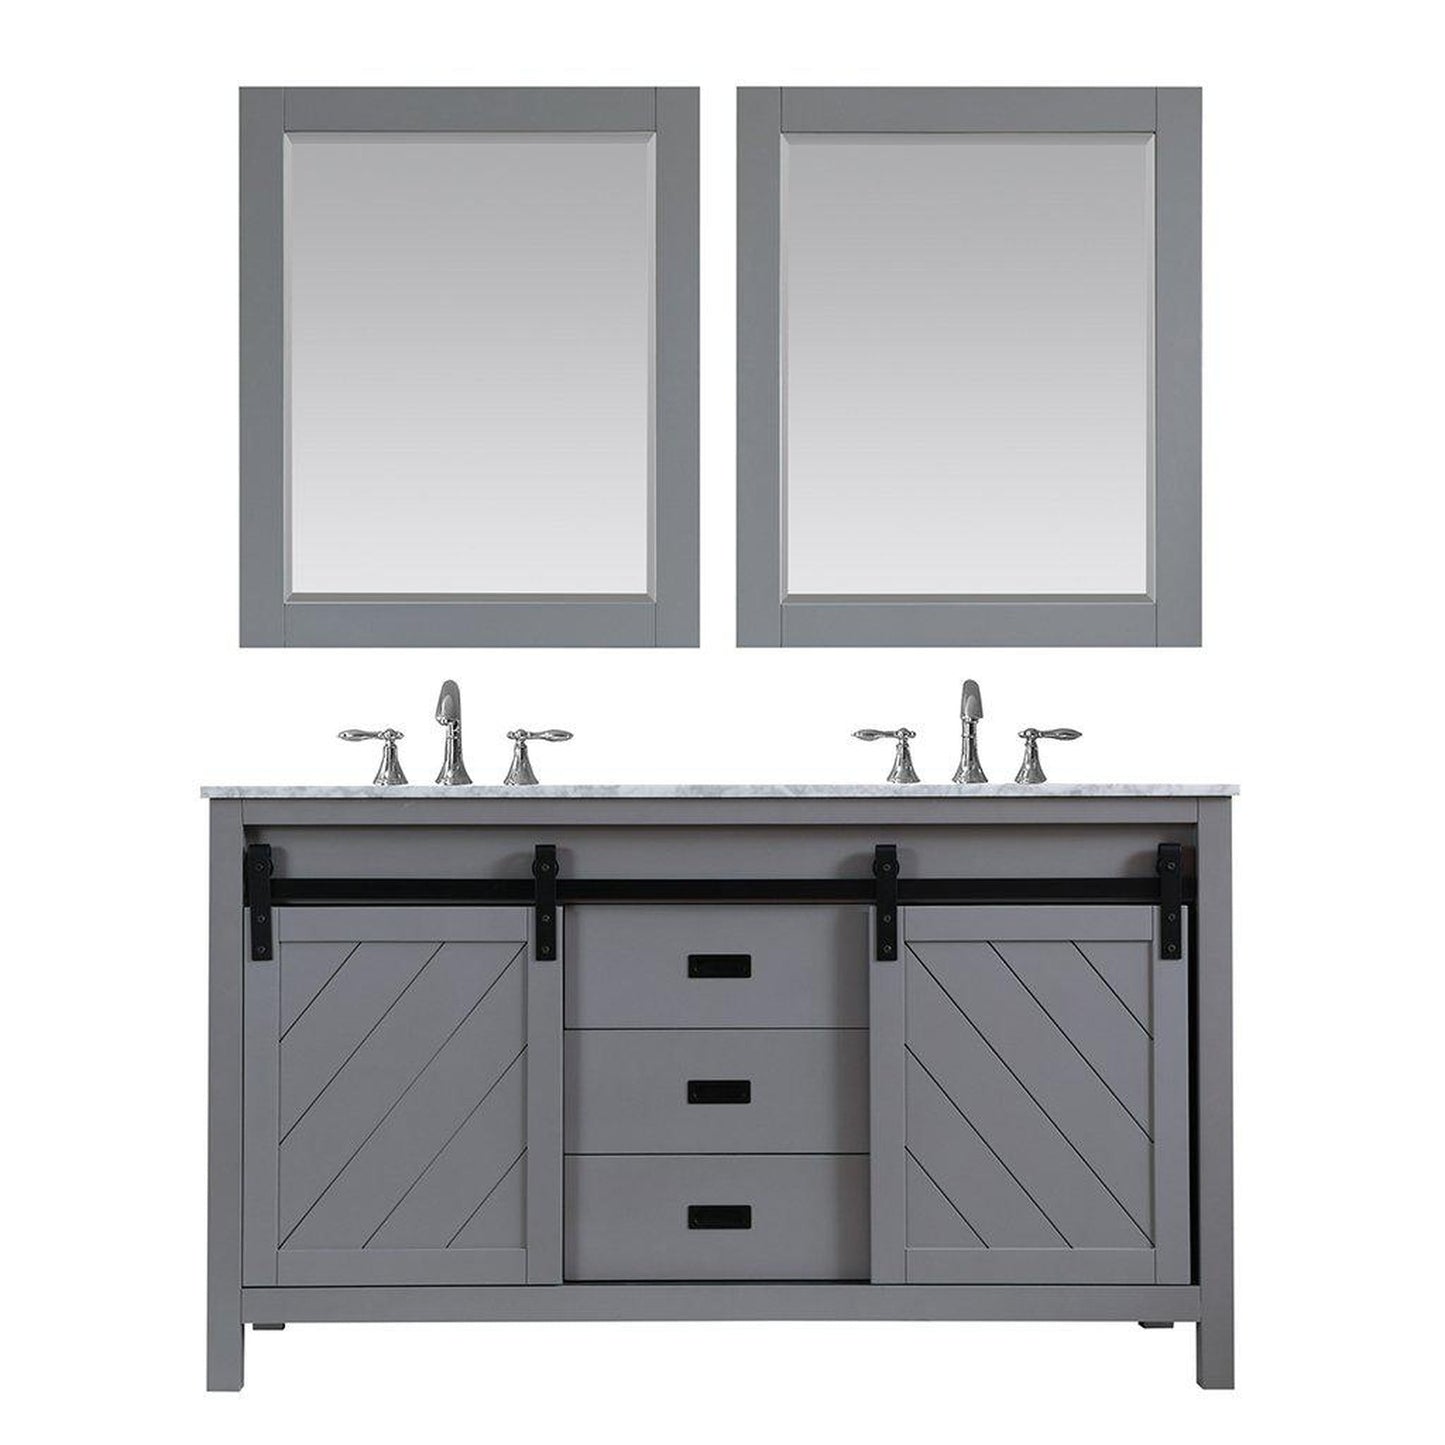 Altair Kinsley 60" Double Gray Freestanding Bathroom Vanity Set With Mirror, Natural Carrara White Marble Top, Two Rectangular Undermount Ceramic Sinks, and Overflow